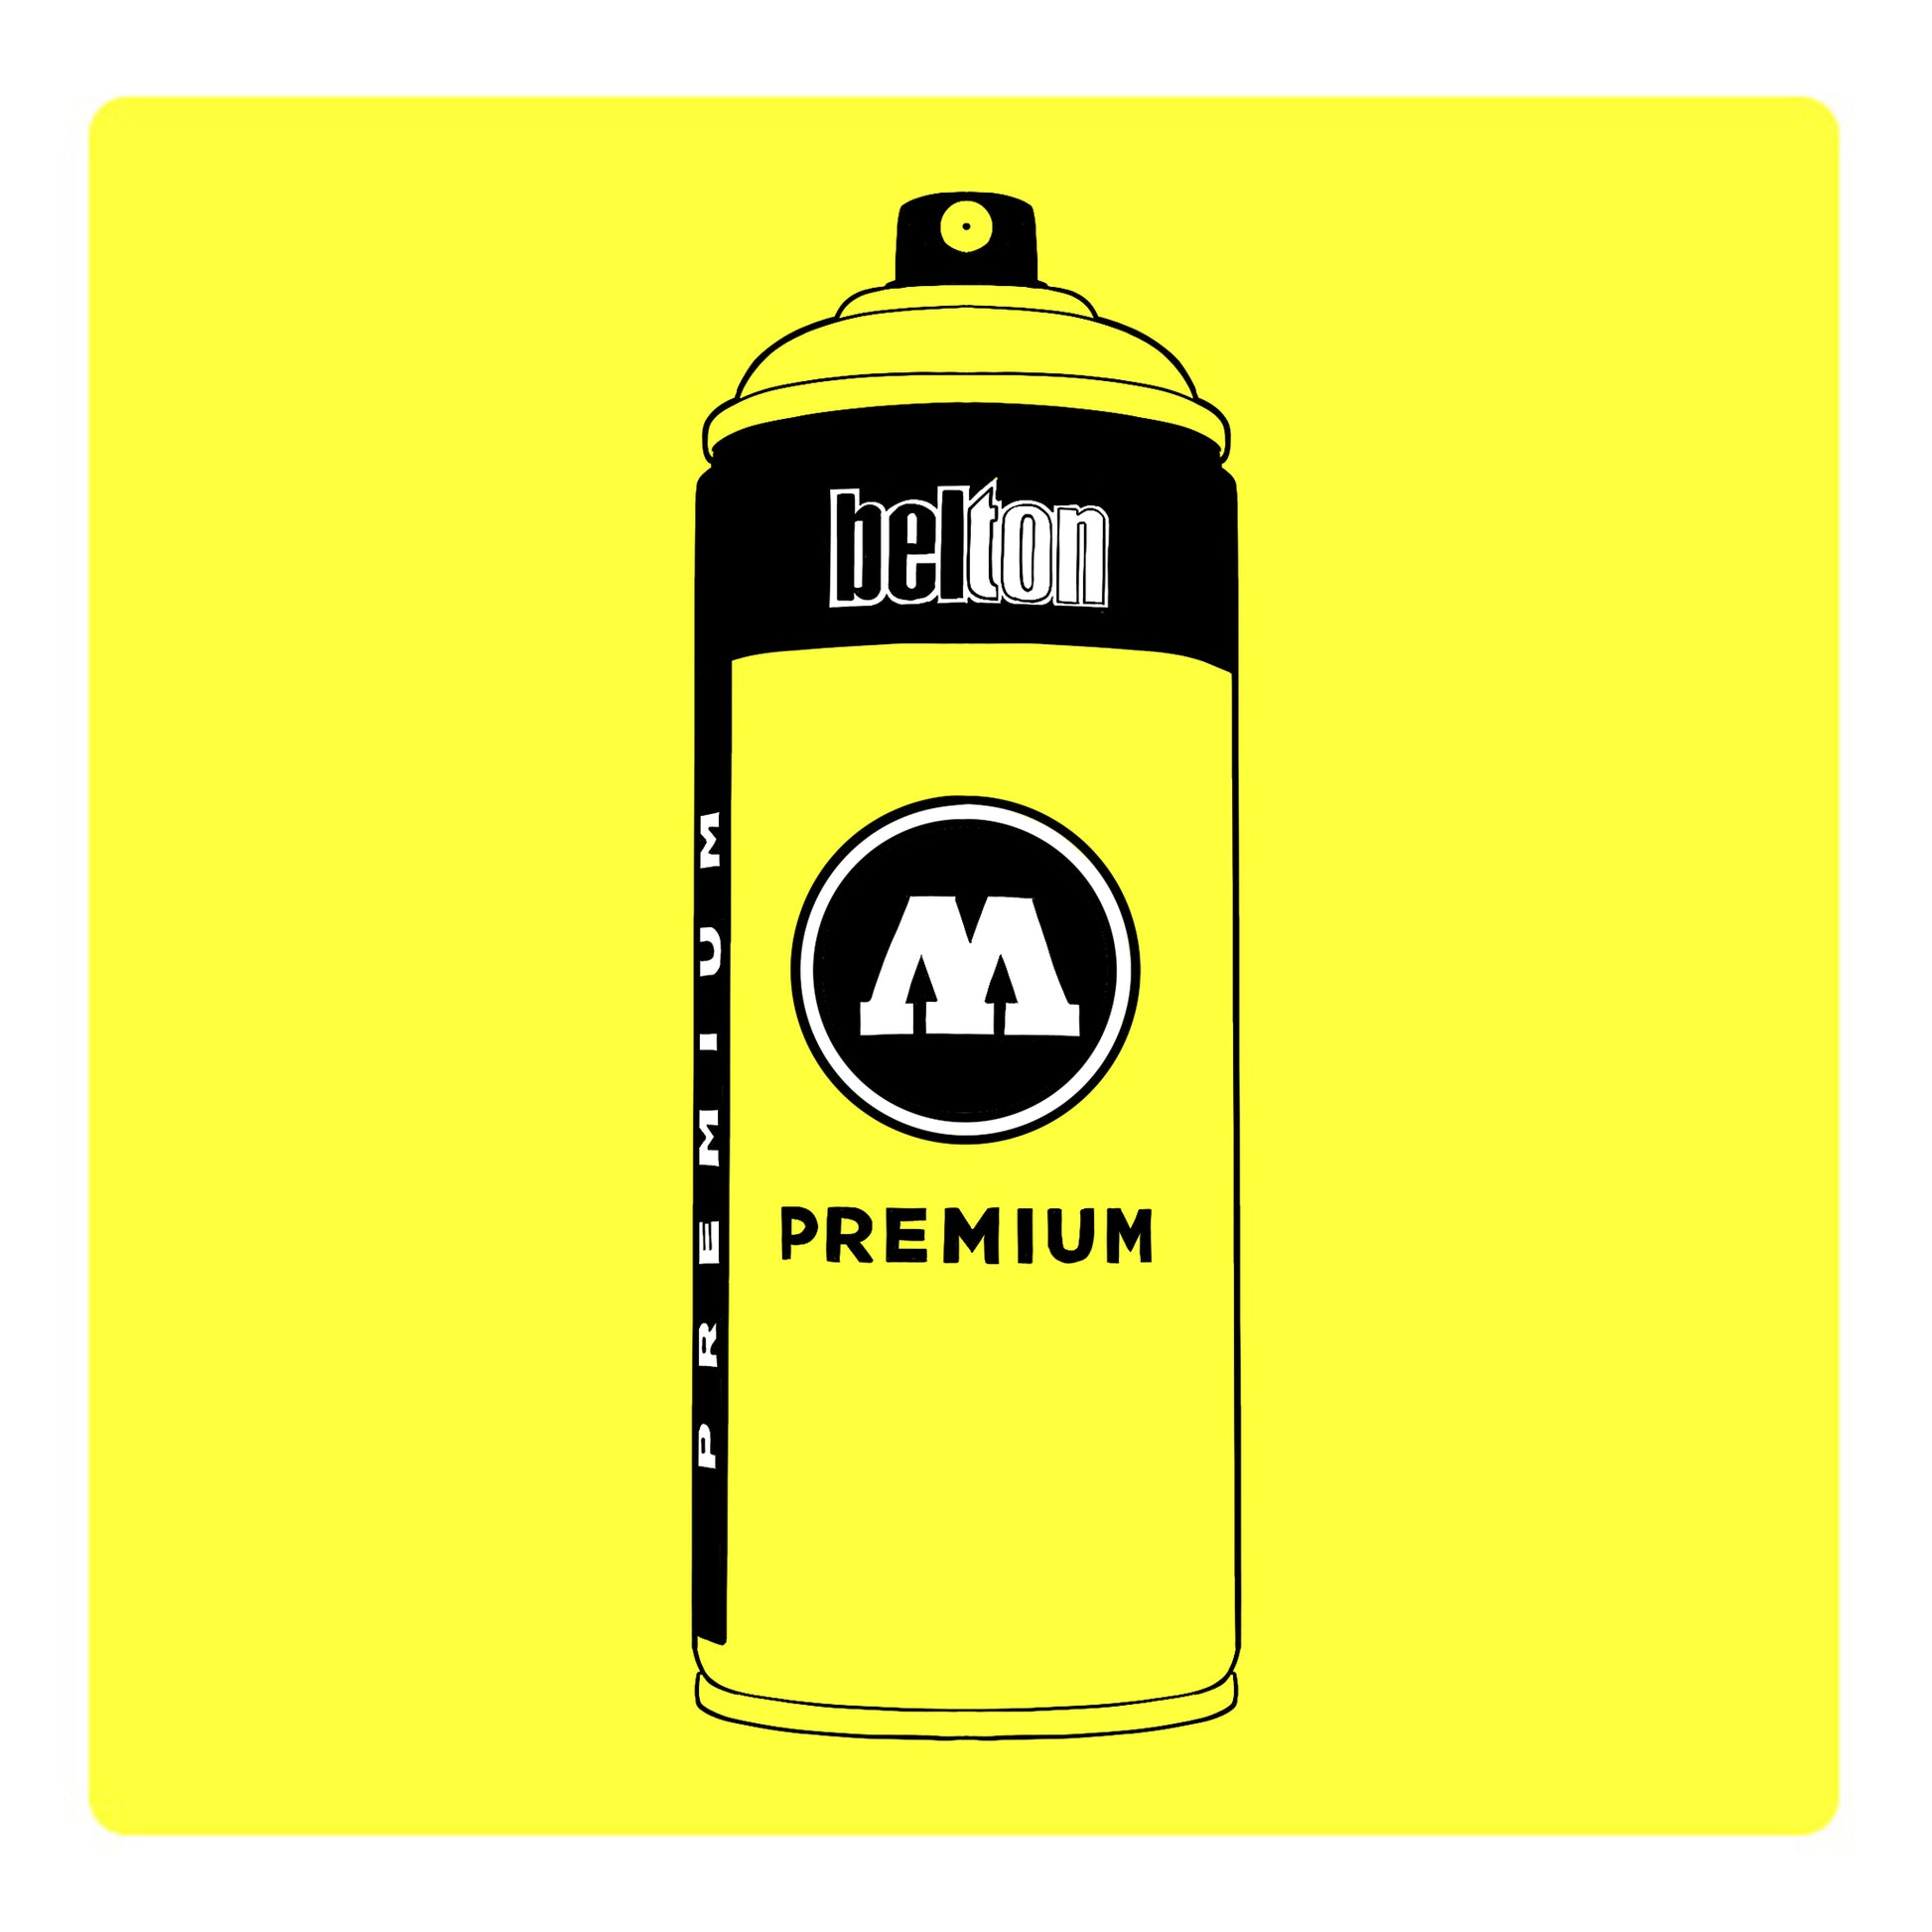 A black outline drawing of a bright yellow spray paint can with the words "belton","premium" and the letter"M" written on the face in black and white font. The background is a color swatch of the same bright yellow with a white border